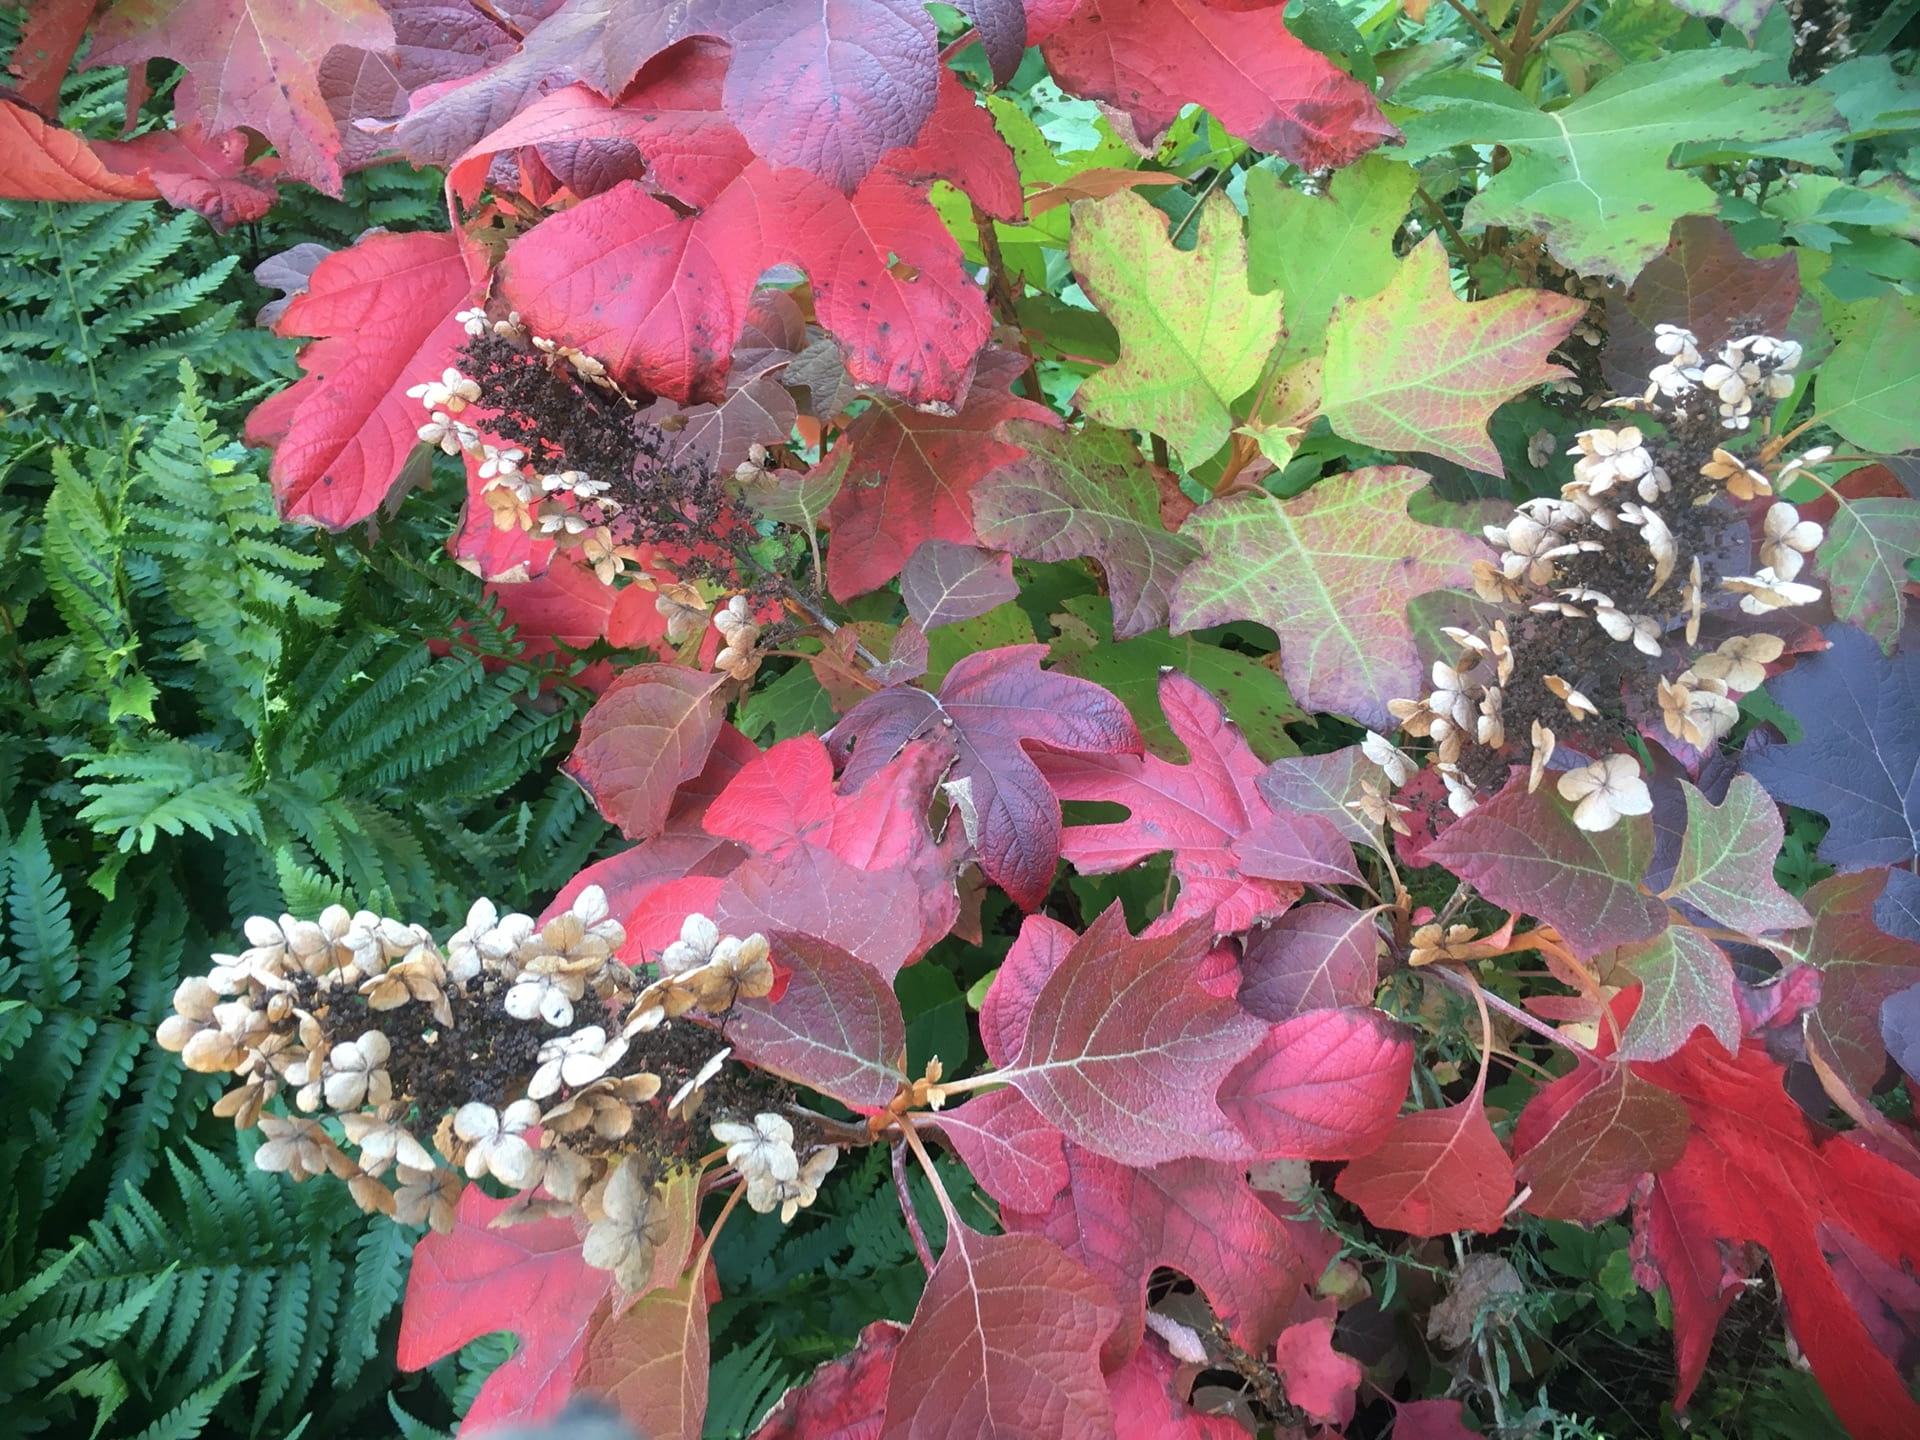 The fall color and long lasting flowers of Hydrangea quercifolia makes this native shrub a fall stand out.